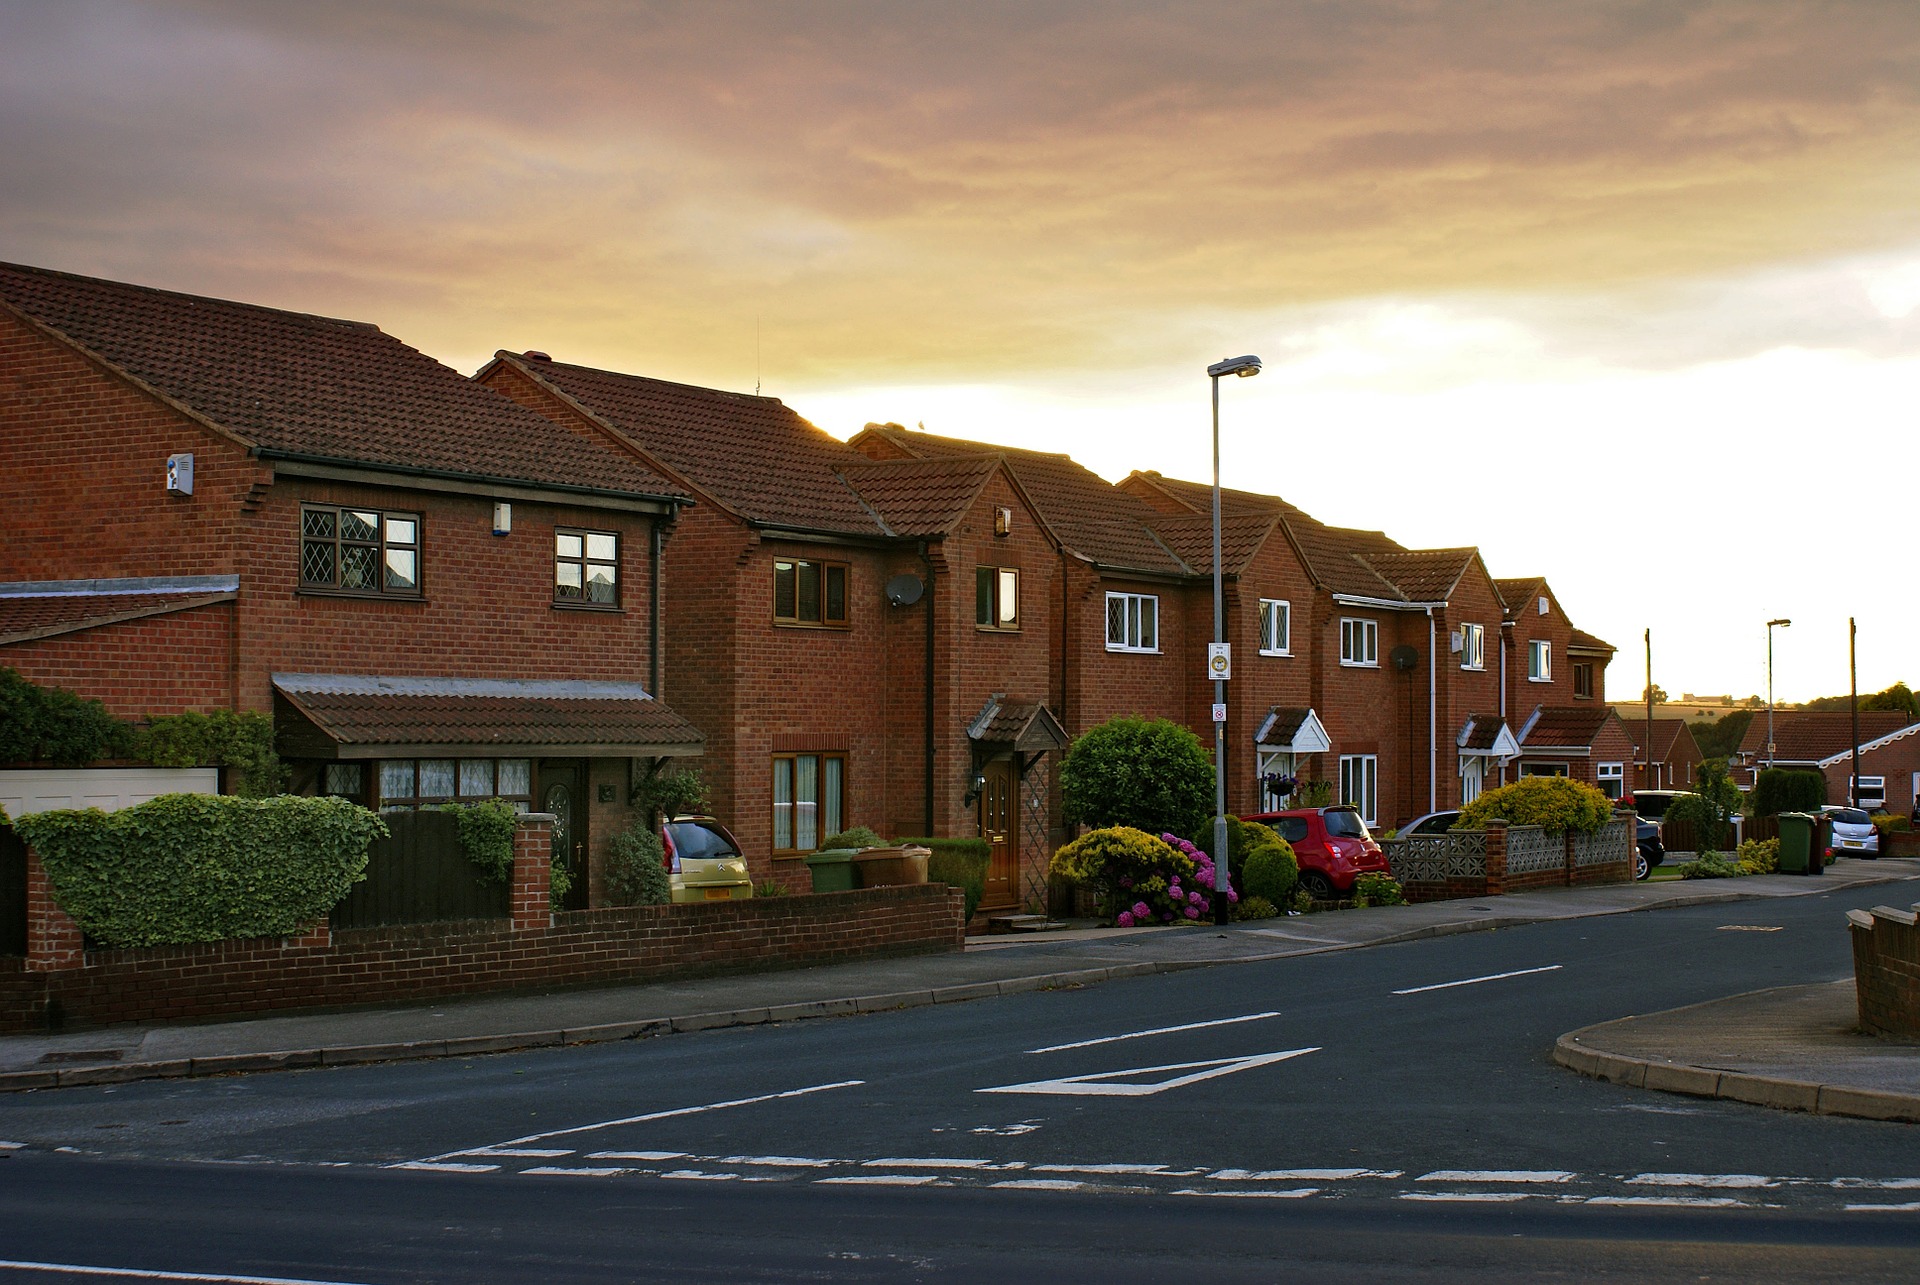 What do garden villages mean for the UK housing sector?